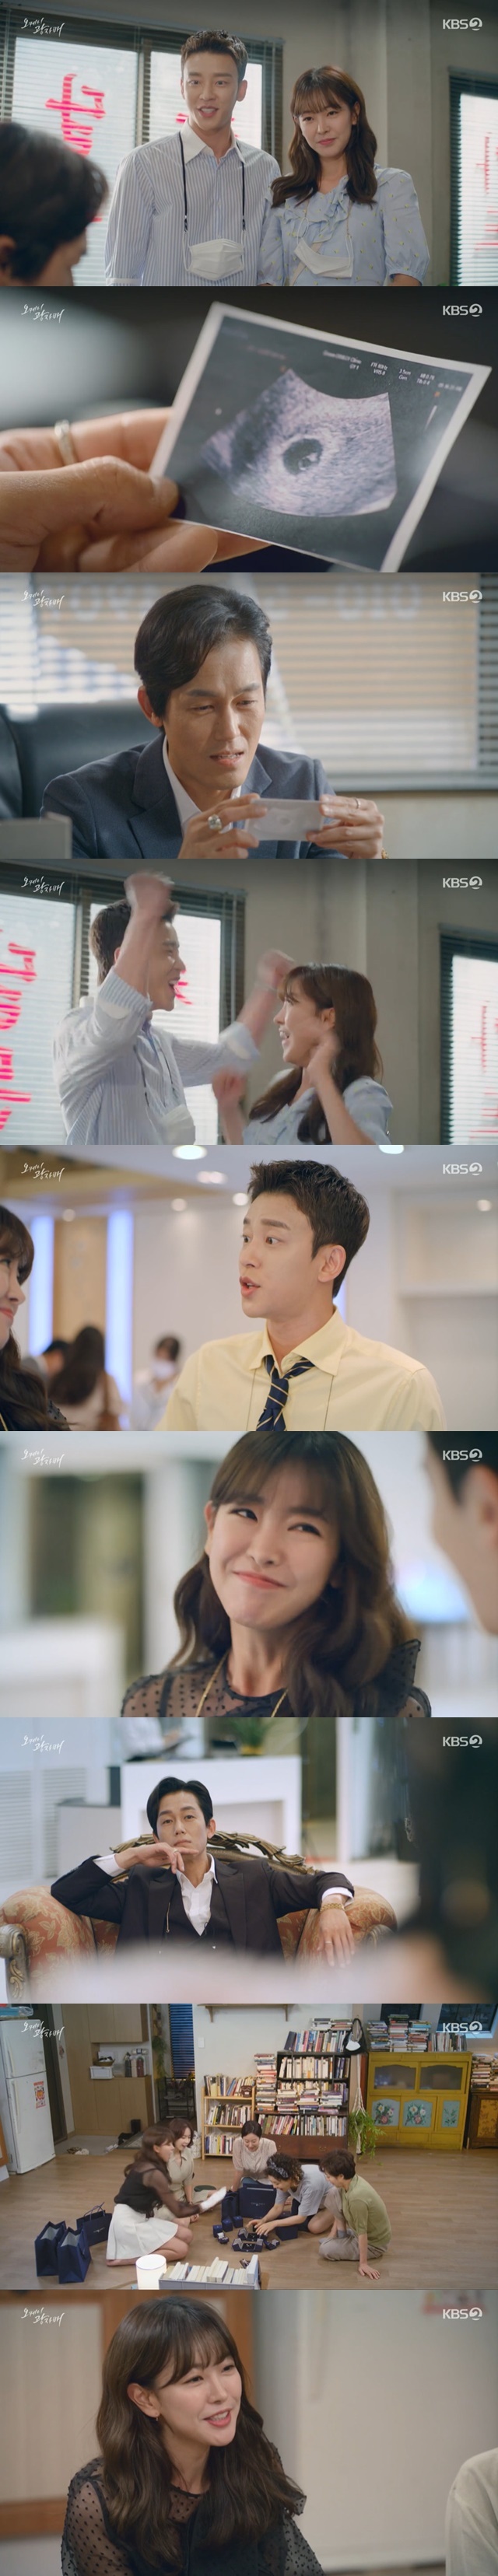 Ko Won-hee is Kaiji with permission to marry for Out of Wedlock lieOn the KBS 2TV weekend drama Okay Photosisters 35 times (playplayed by Moon Young-nam/directed by Lee Jin-seo) broadcast on July 17, Ko Won-hee deceived Huh Ki-jin (played by Seol Jeong-hwan) and Out of Wedlock by lying and received permission to marry.Lee Kwang-tae made up Out of Wedlock lie while he was in a hurry to marry knowing that his hungry brother,Lee Cheol-soo (Yoon Joo-sang), who had an antipathy to the fact that Huh Pung-jin had collected money as a Ushijima the Loan Shark business owner, also allowed her daughter Lee Kwang-tae to marry only because she knew Out of Wedlock.On this day, Lee Kwang-tae and Hung Gi-jin showed an ultrasonic photo to Hung Pung-jin and said, I do not know if this is my son or daughter yet.I dont know how much I can see, said Heo Pung-jin, who was thrilled to say, but when would it be better to get married?When Ushijima the Loan Shark (a good man) worried that if it collapses so soon, it will be out of plan, he said, Why do I see this and my heart is so piercing and tears are pinging?I finally have my blood, and I think my long-awaited desire is fulfilling. I think this is Lee Kwang-taes fate. I am destined to become my family. Lee Kwang-tae started preparing for the marriage, and Lee Kwang-tae went shopping with her sister Lee Kwang-nam (Hong Eun-hee), saying, My wife wants to choose everything she likes.You pick the best one for our honeymoon room, and you pick this one, Lee said, and you do what you have to do at your home.This is more than your blessing.Heo Pung-jin took care of Lee Kwang-taes shells at all and wrote, Please choose what you like. Lee Kwang-tae said, I want you to sweep everything without any trouble.He promised to let me sweep all of you on the anniversary of my marriage next year. Lee Kwang-tae returned home heavily with his hands and prepared for the drama and drama marriage with his sister Lee Kwang-sik.In the meantime, Lee Kwang-sik tried to save the newlyweds house with Han Ye-seul (Kim Kyung-nam) and the monthly rented semi-basin house and fill the newlyweds house with used furniture.Oh Bong-ja (Lee Bo-hee) wanted to buy her a bed as a gift and asked, Its a secret to a gwang-tae. She goes to a rich house.Lee Kwang-sik decided to end the shell with a coupling that Han Ye-seul had.Lee Chul-soo wanted Lee Kwang-sik and Lee Kwang-tae to marry in order, and Lee Kwang-tae, who was in a hurry because of the Out of Wedlock lie, proposed a joint wedding ceremony.The couple, Lee Kwang-nam and Bae Byeon-ho (Choi Dae-cheol), who reunited, will hold a wedding together, and the three sisters announced a joint wedding ceremony.After that, through the trailer of the end of the broadcast, the figure of the brother, Huh Gi-jin, who gives the building as a wedding gift to his brother, was drawn.